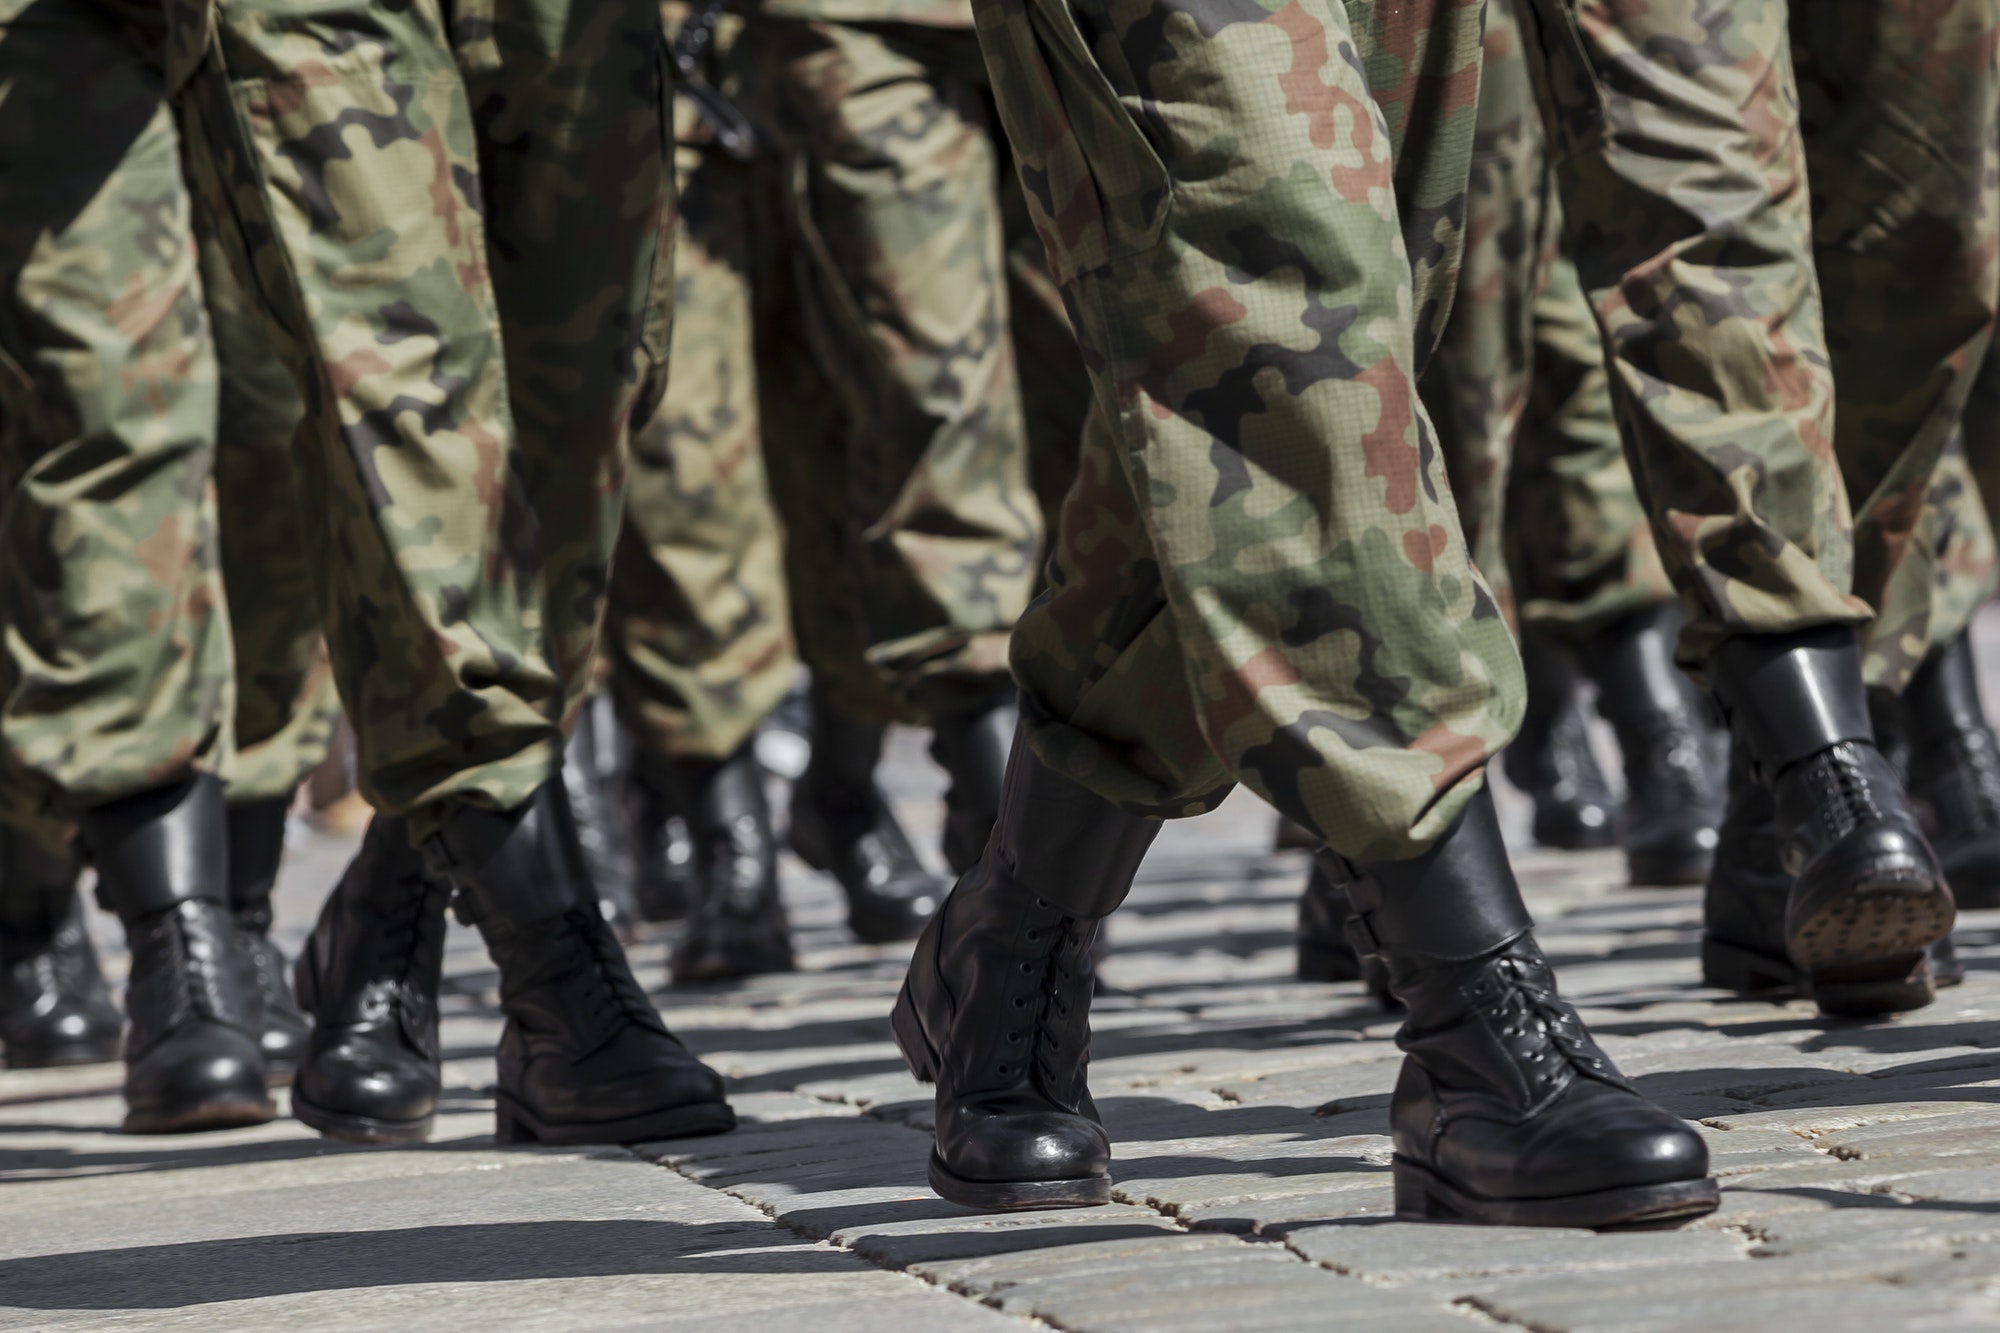 Soldiers march in formation